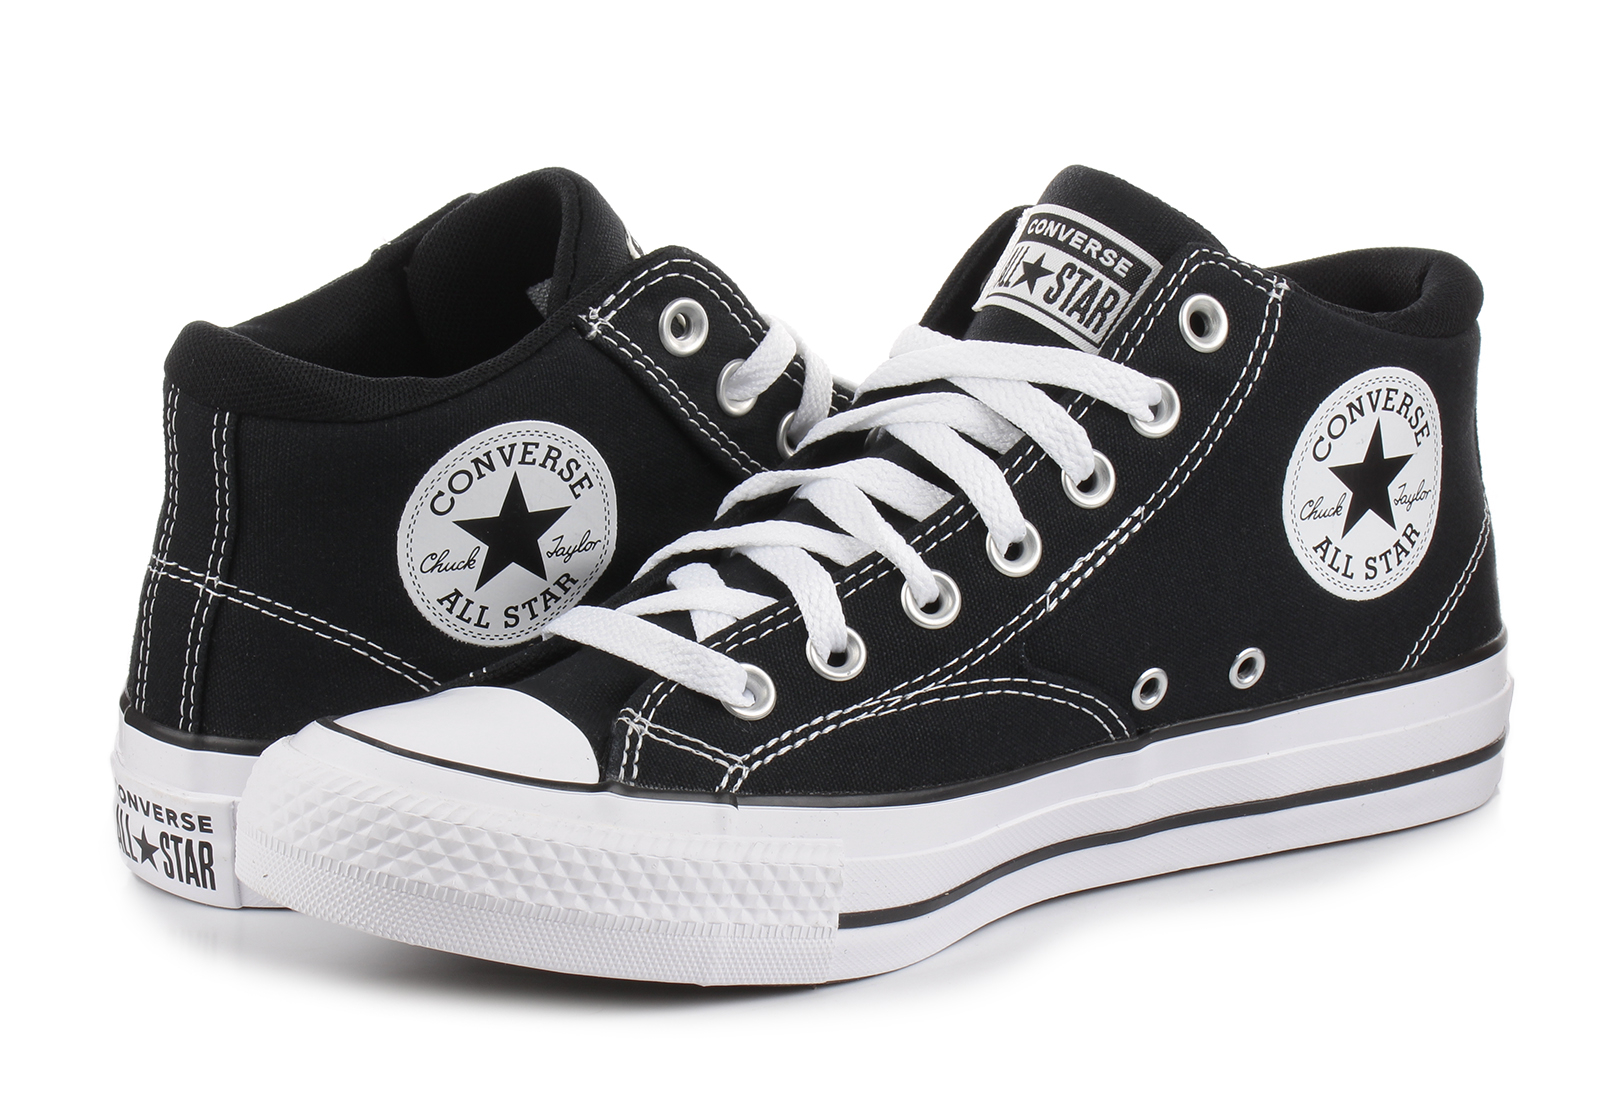 boots Converse shoes and Online trainers shop High Malden Chuck - sneakers, A00811C - Star for Taylor All Street -